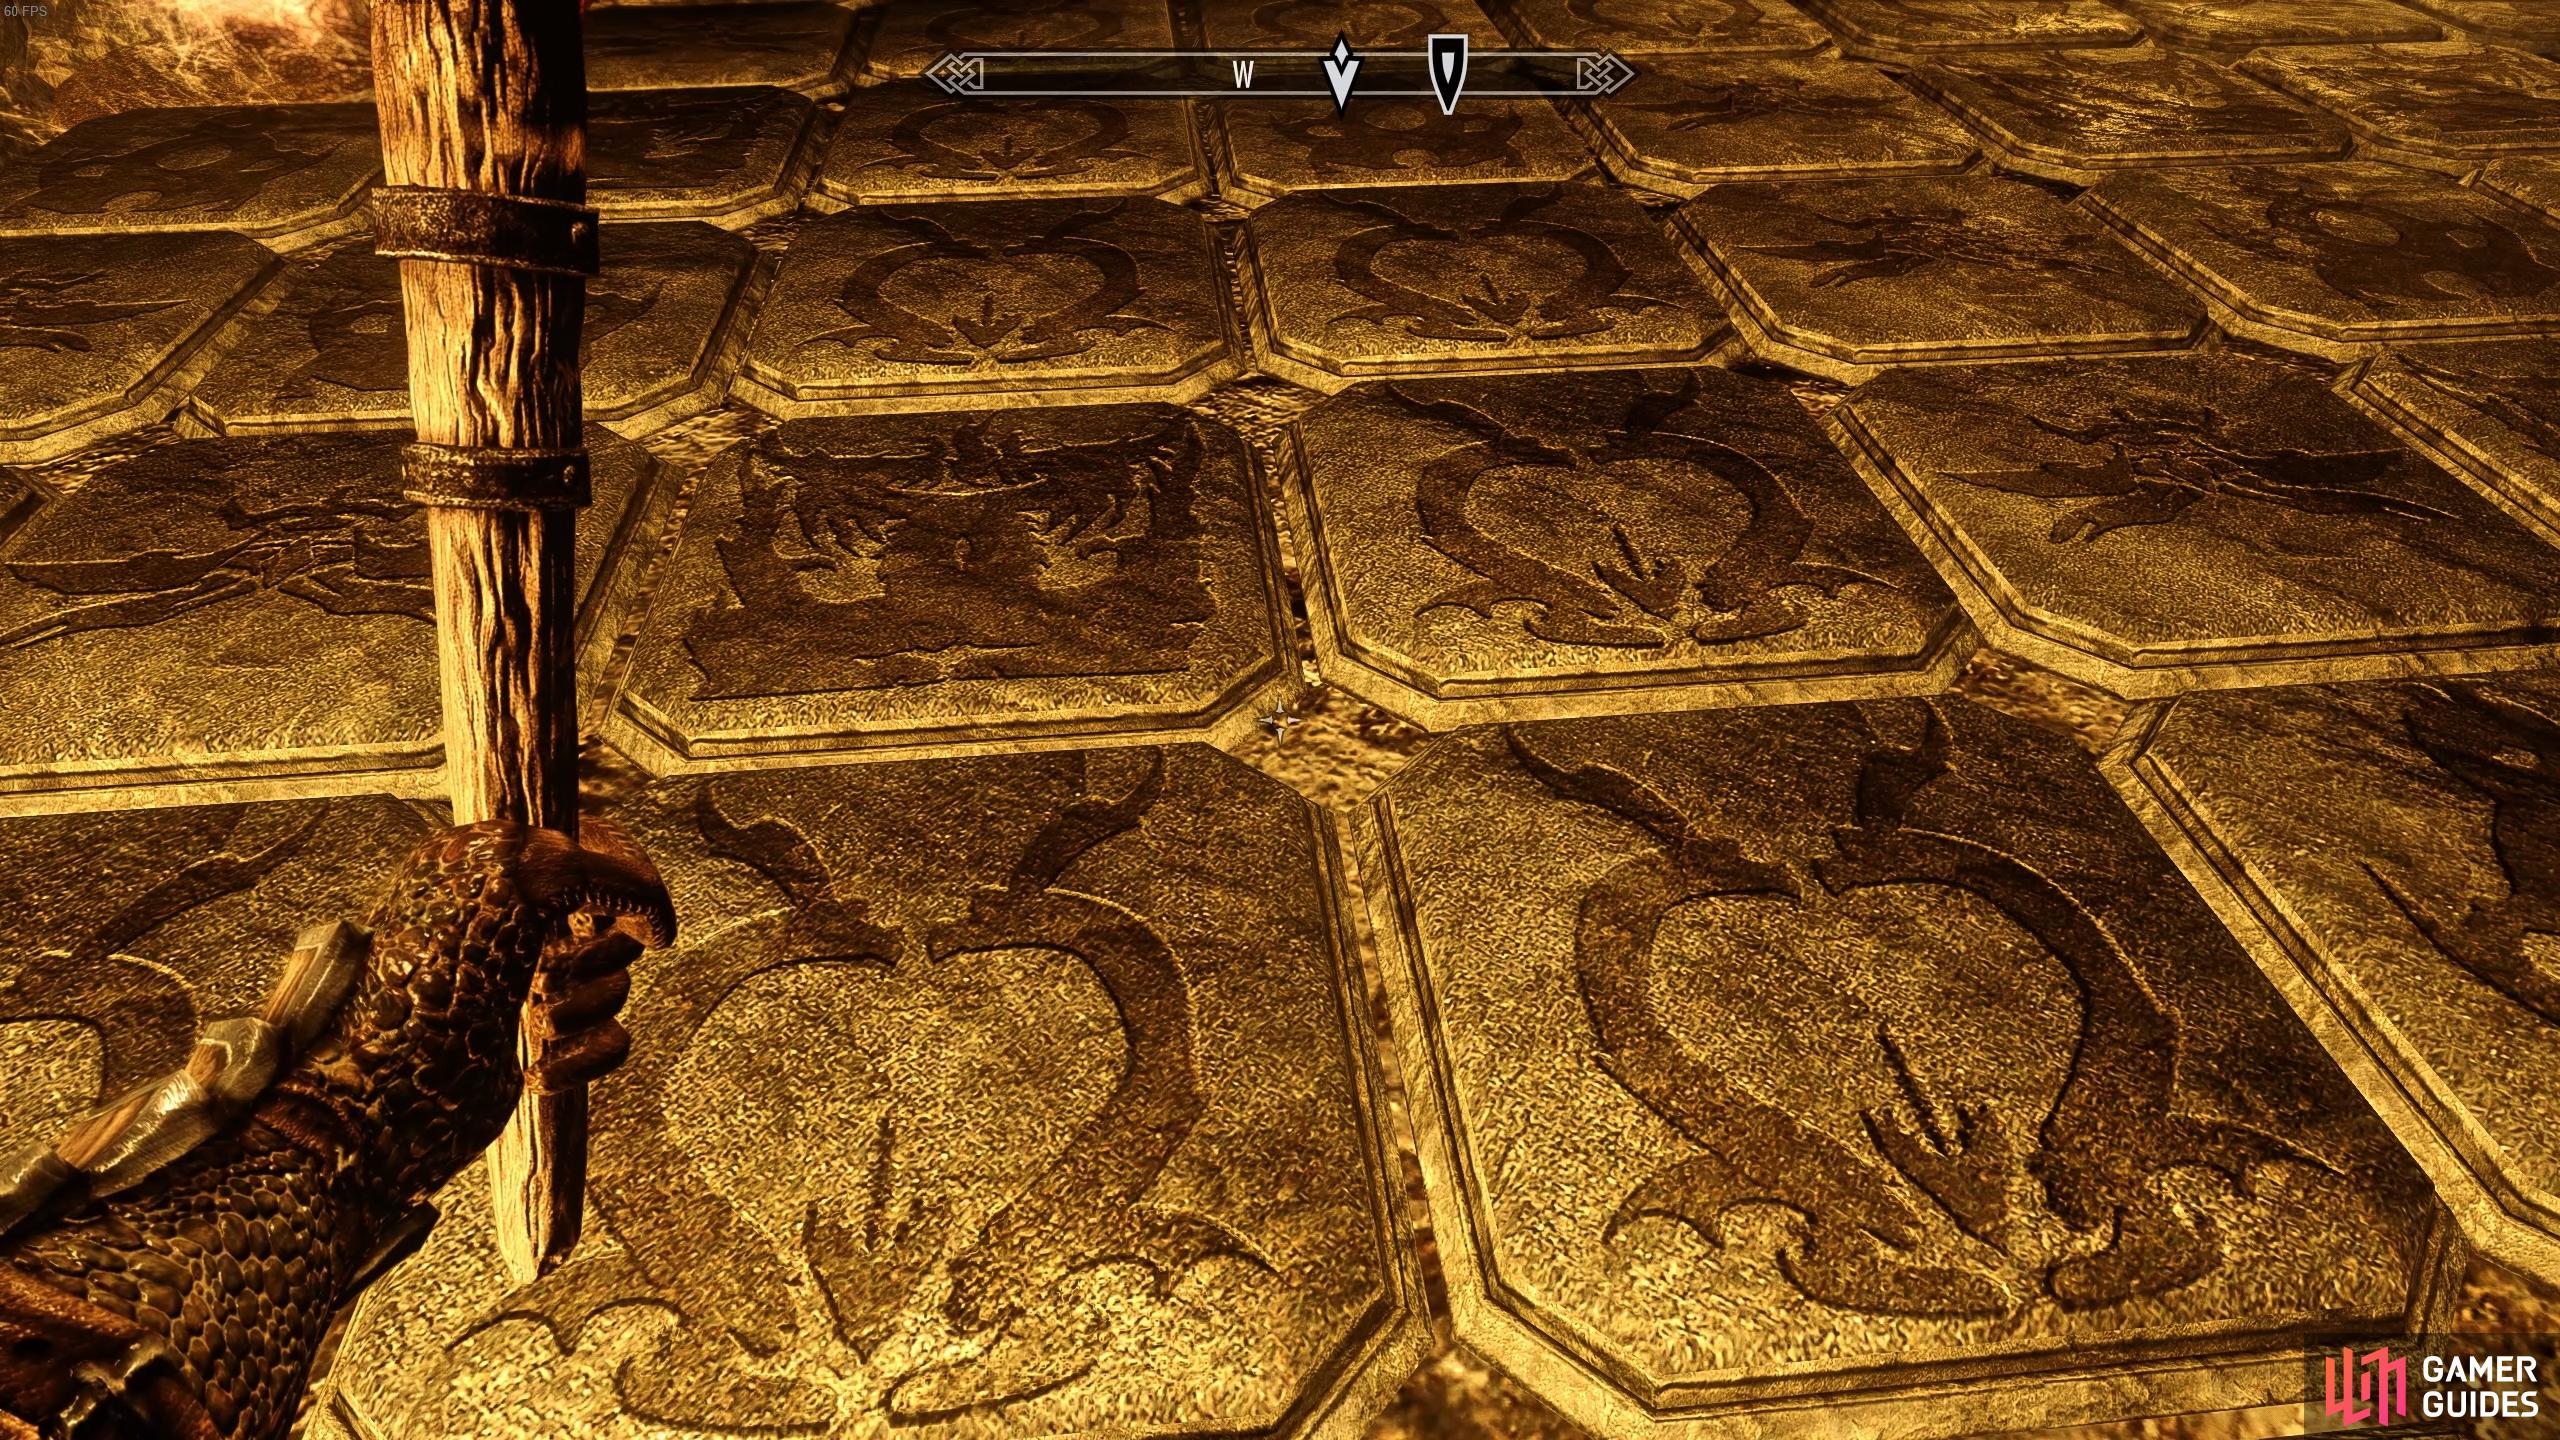 You should only step on Dragonborn symbols to avoid being hit by fire.